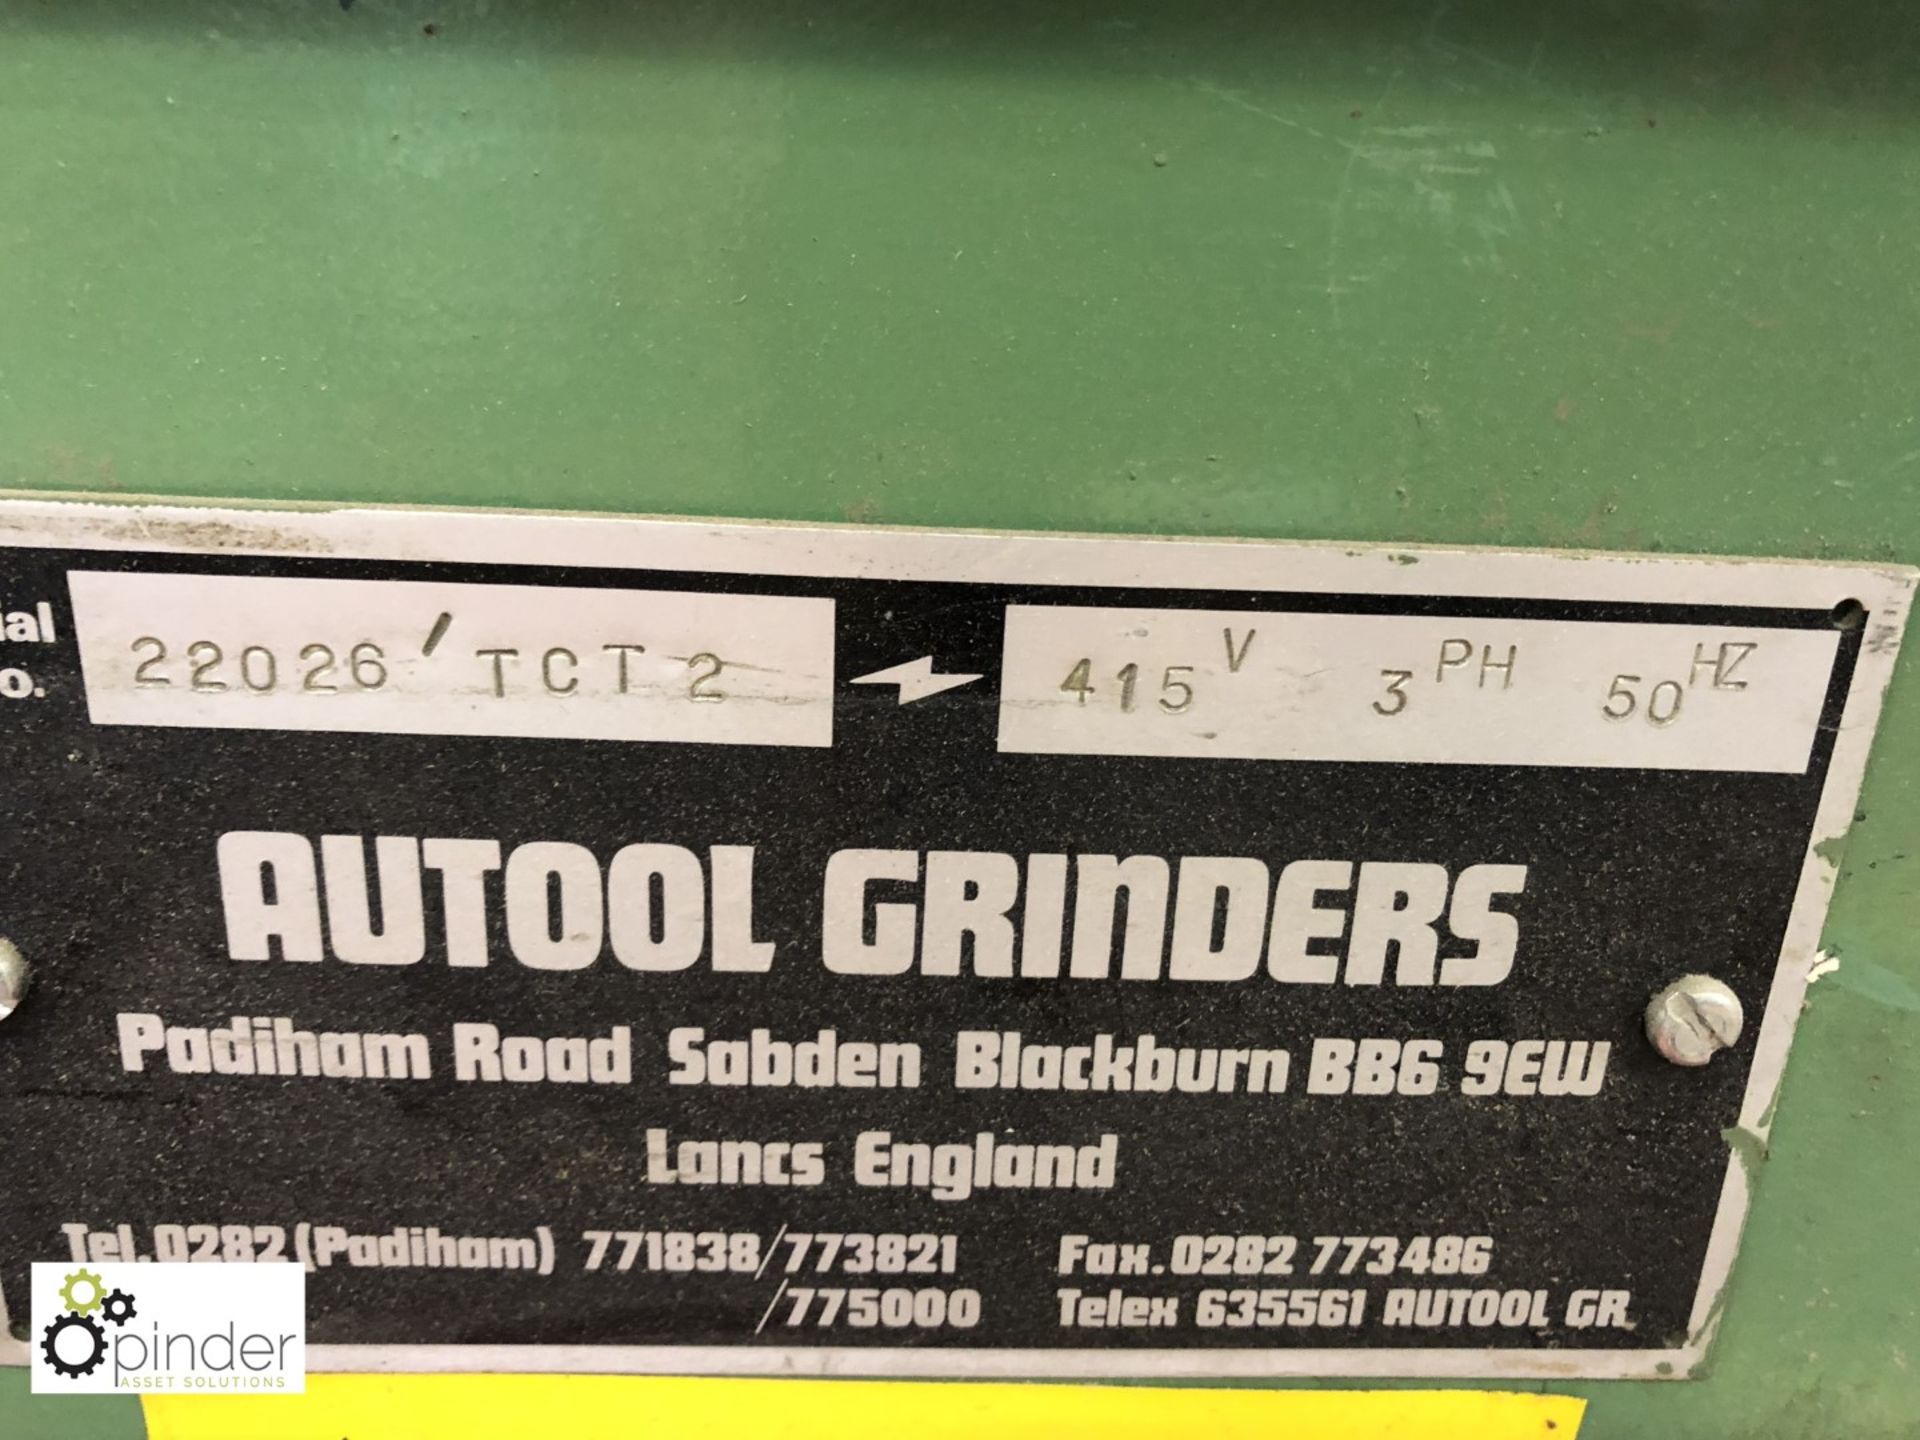 Autool Grinders TCT2 Drill Grinder, 415volts, serial number 22026 - Image 4 of 4